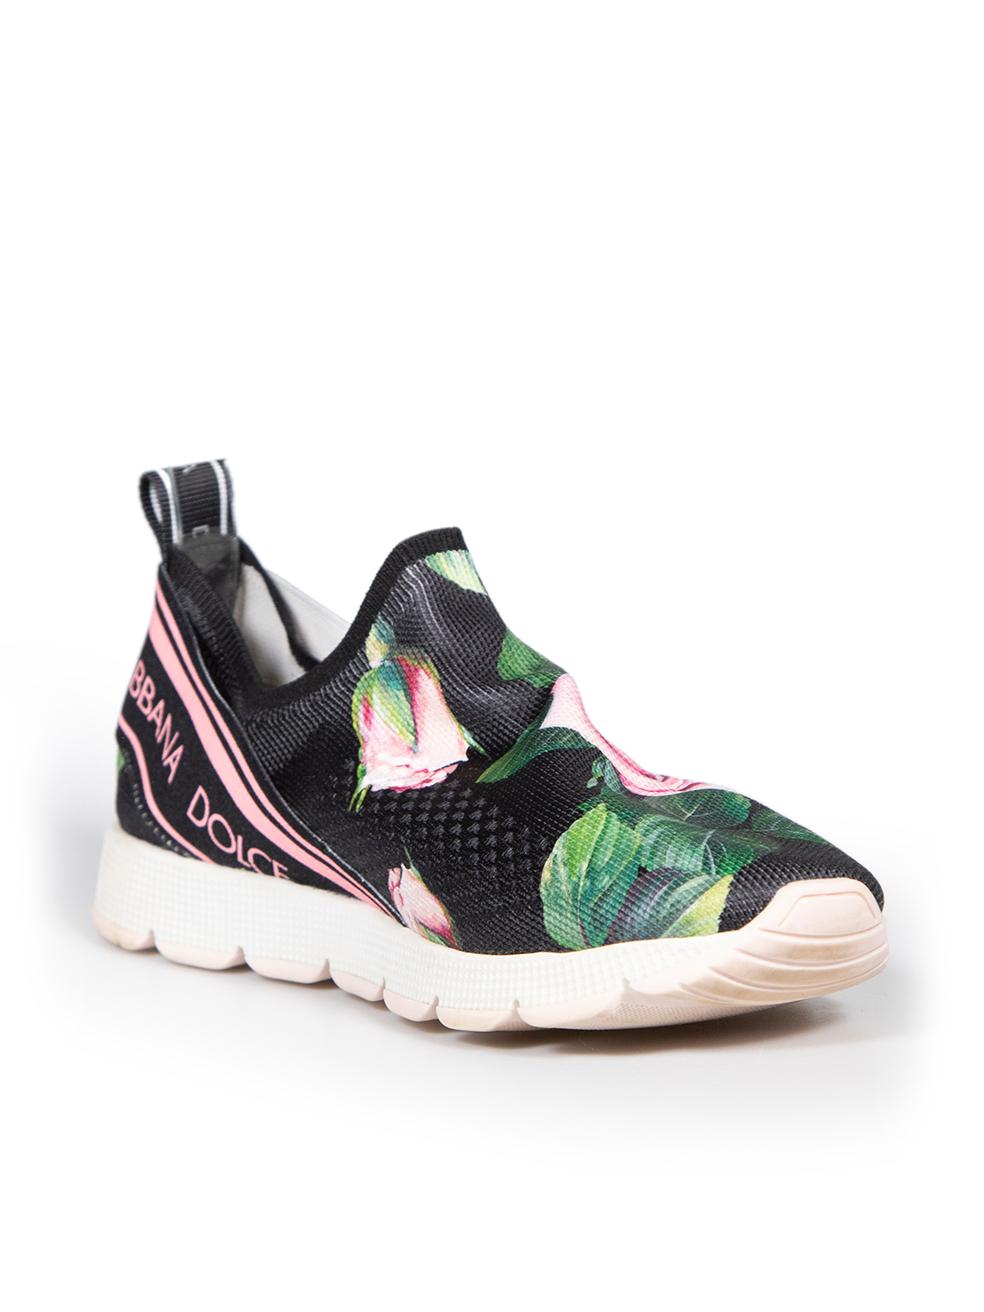 CONDITION is Good. General wear to trainers is evident. Moderate signs of wear to the soles on this used Dolce & Gabbana designer resale item.
 
 
 
 Details
 
 
 Model: Sorrento
 
 Multicolour- black, pink, green
 
 Cloth
 
 Trainers
 
 Slip on
 
